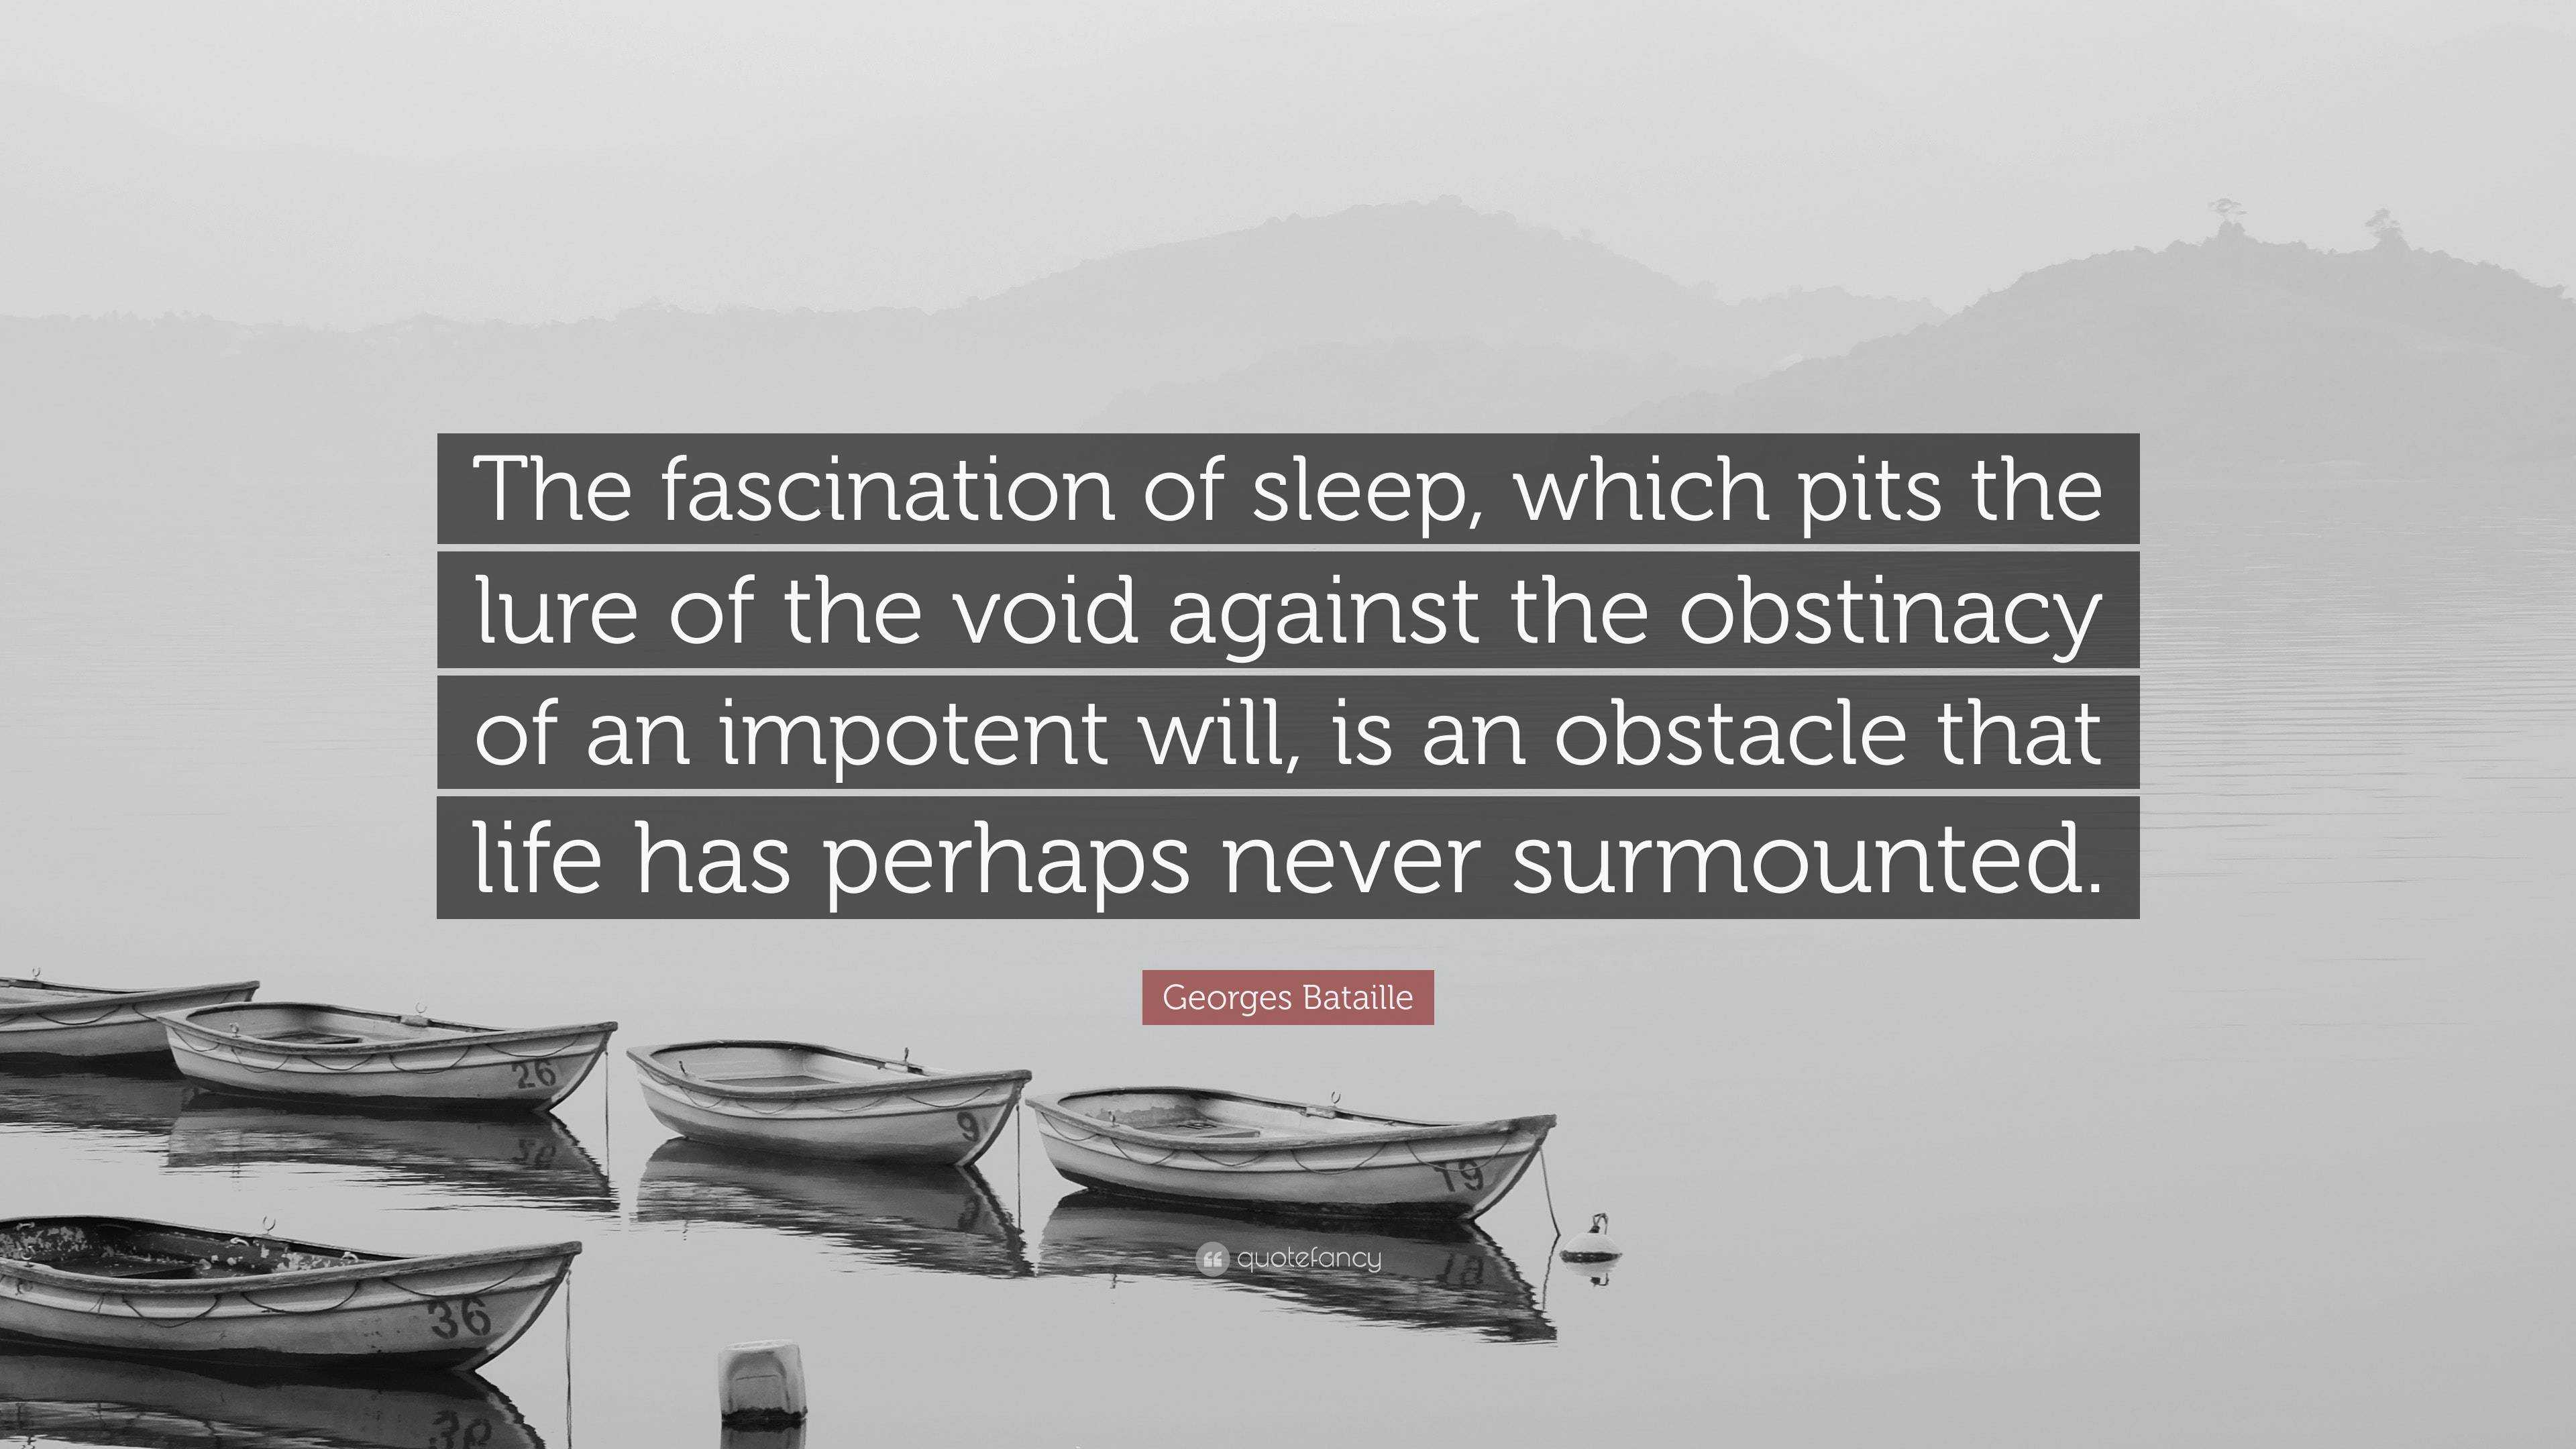 Georges Bataille Quote: “The fascination of sleep, which pits the